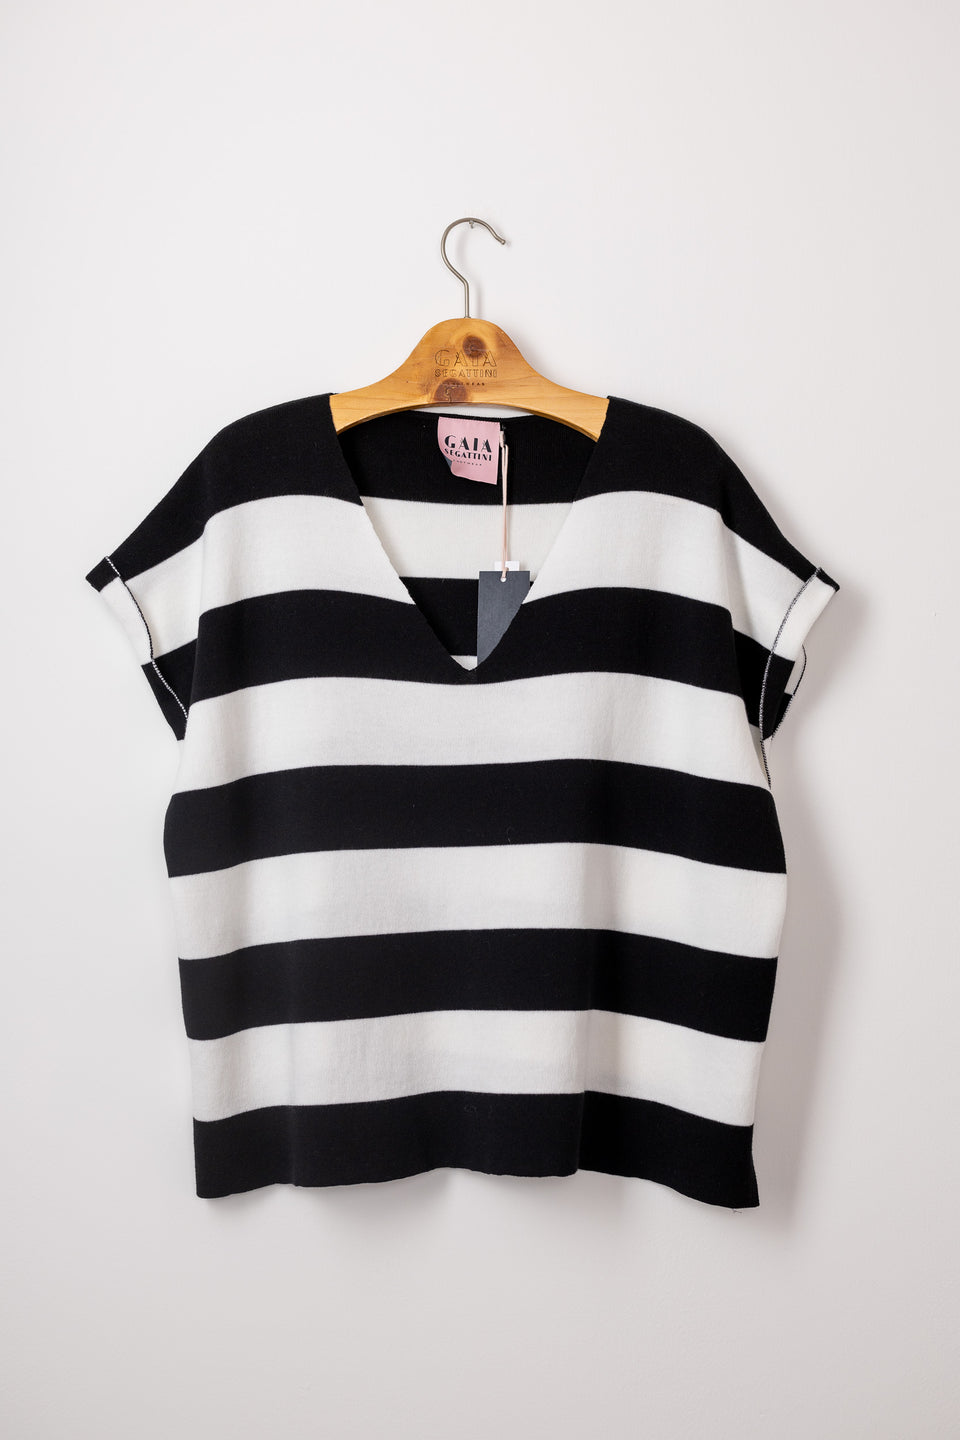 peace knit tshirt - striped black and white 